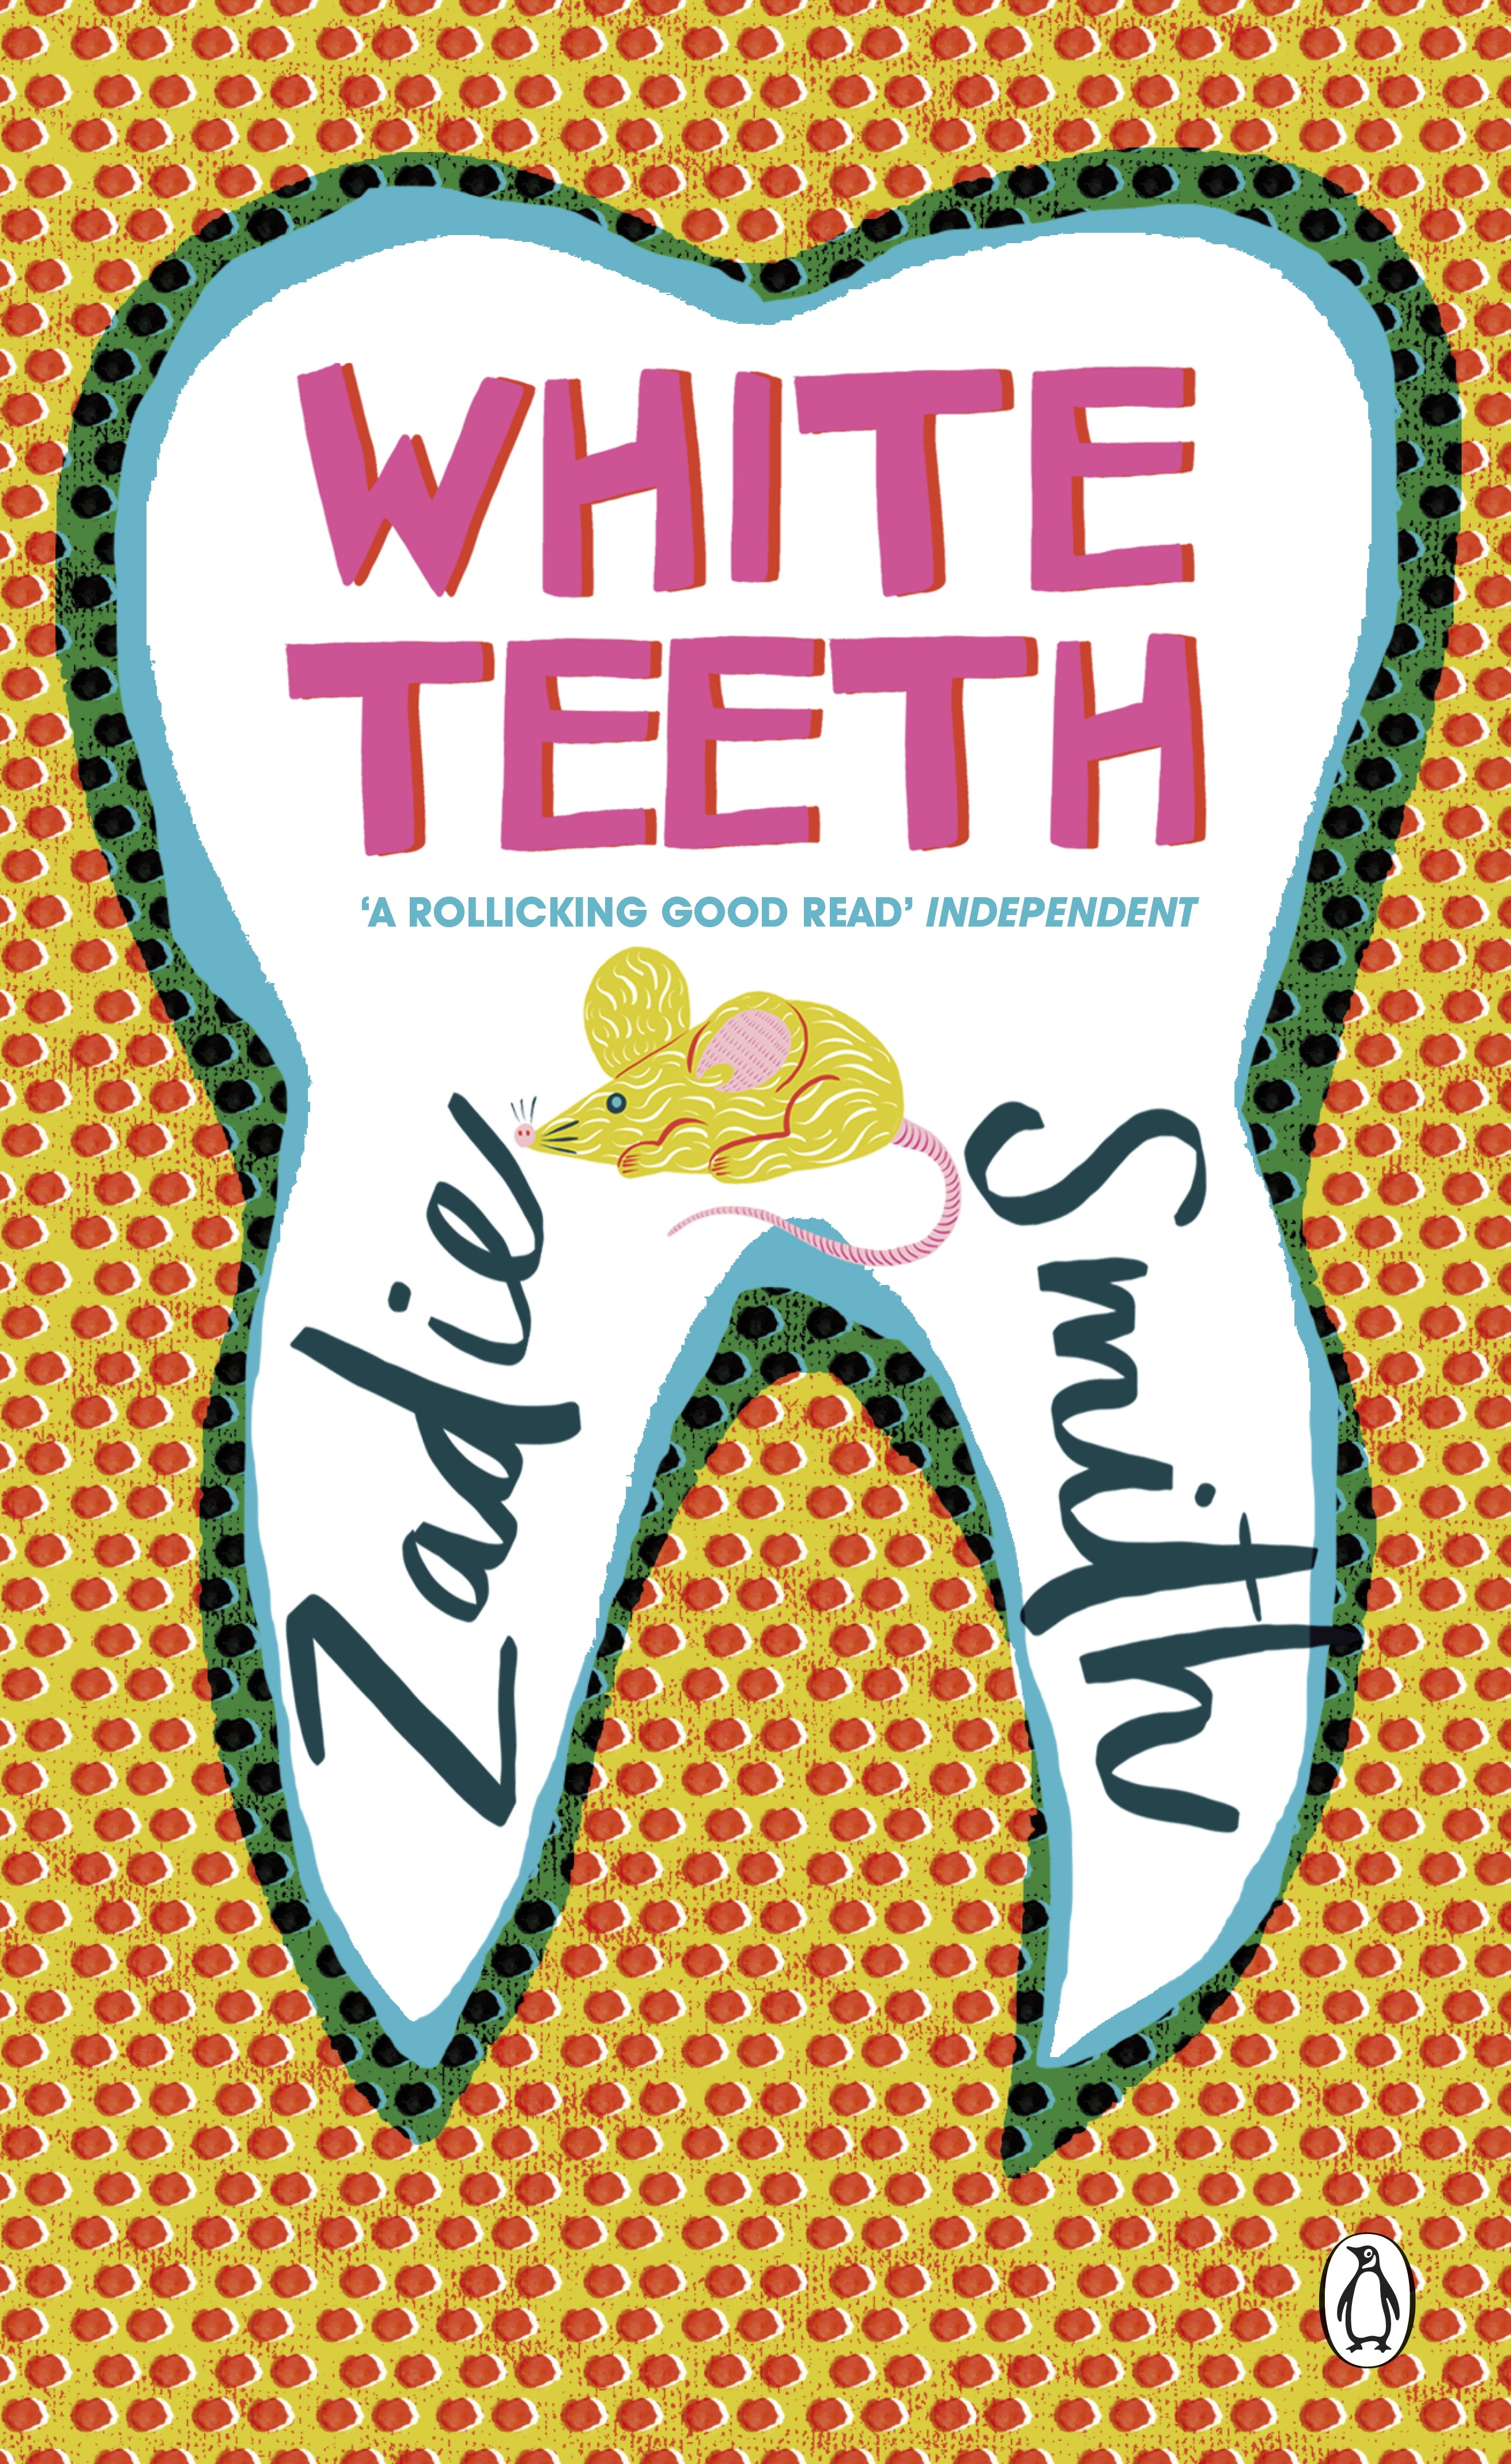 Book “White Teeth” by Zadie Smith — June 1, 2017